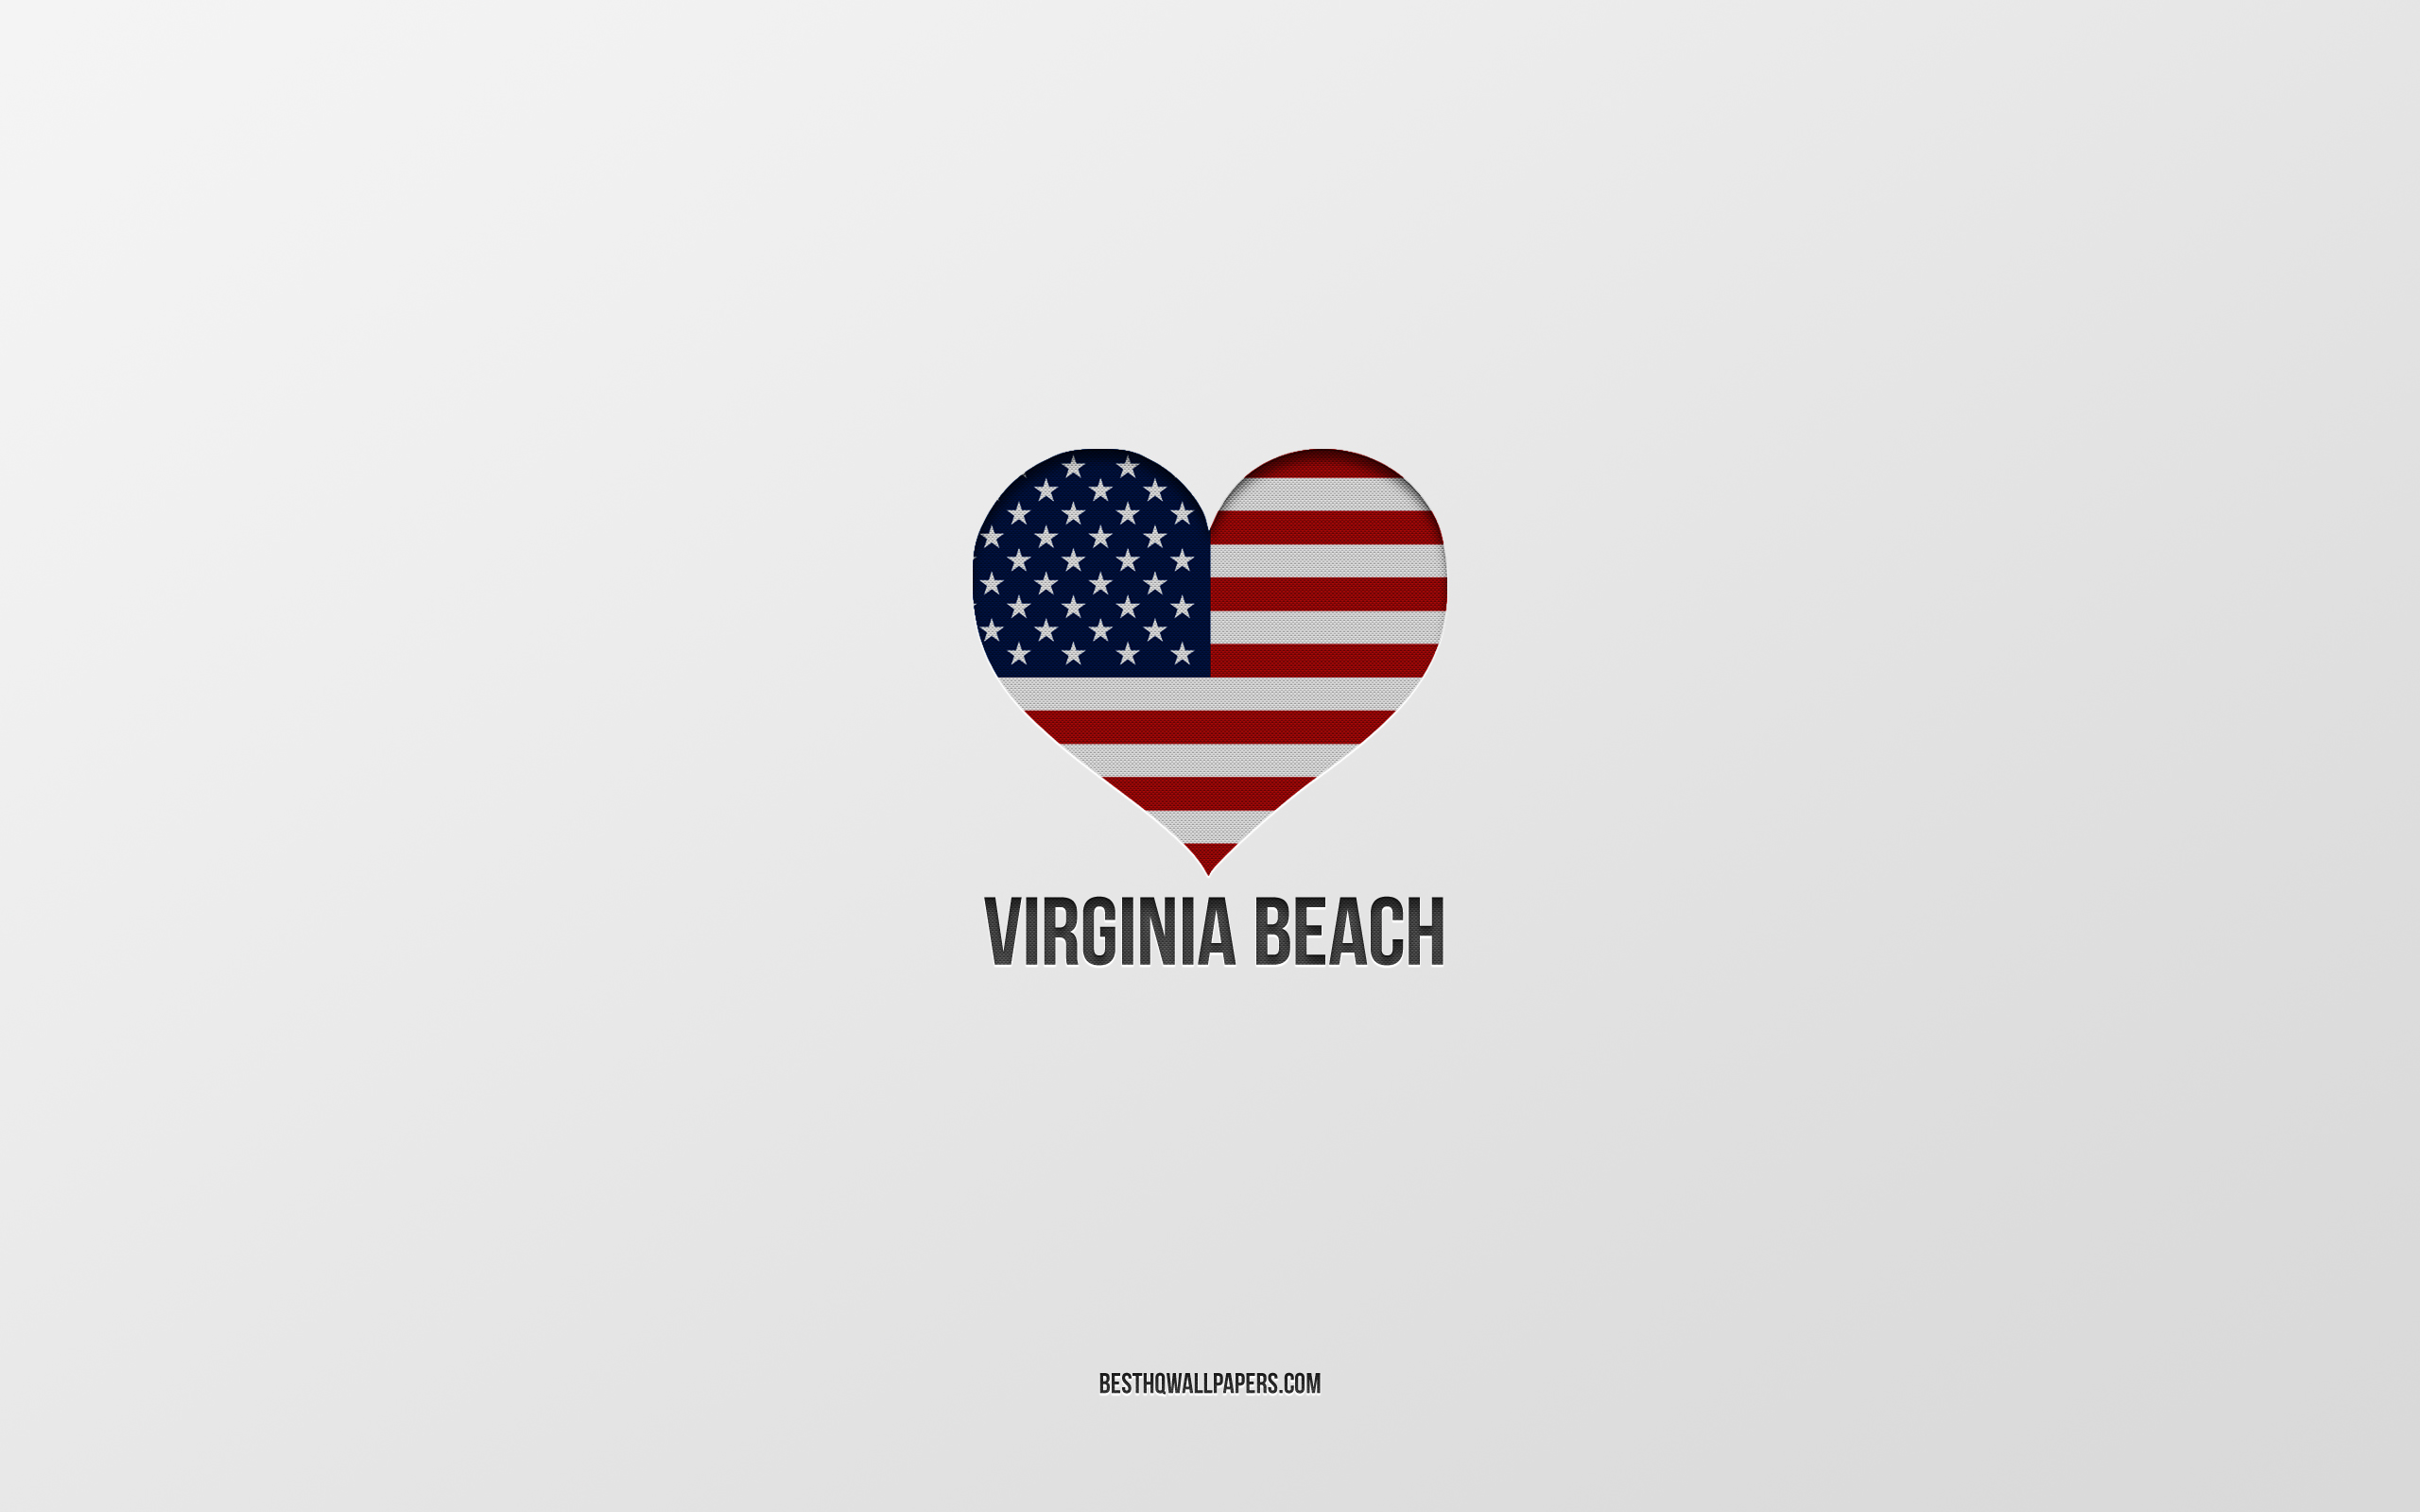 Download wallpaper I Love Virginia Beach, American cities, gray background, Tucson, USA, American flag heart, favorite cities, Love Virginia Beach for desktop with resolution 2560x1600. High Quality HD picture wallpaper